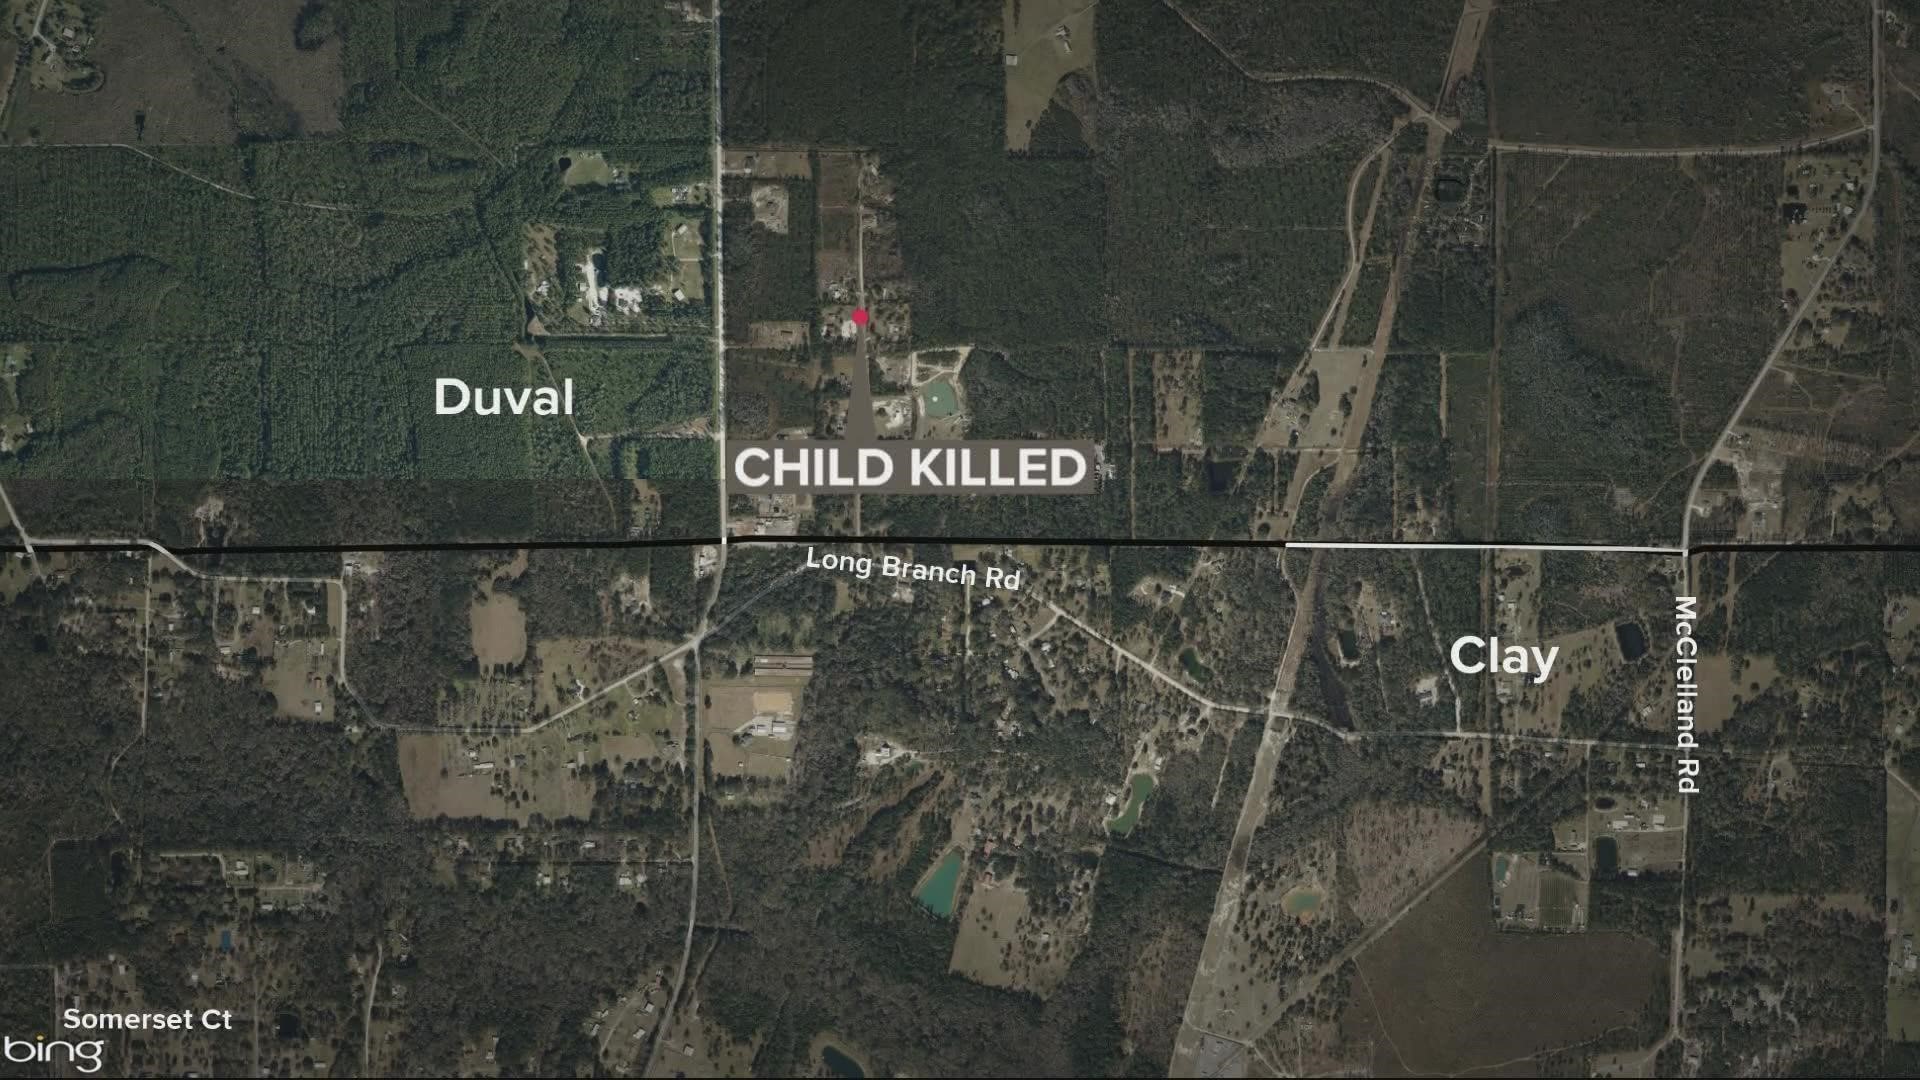 An 11-year-old child was killed in an accident while playing in the Maxville area on Friday night, according to the Jacksonville Sheriff's Office.